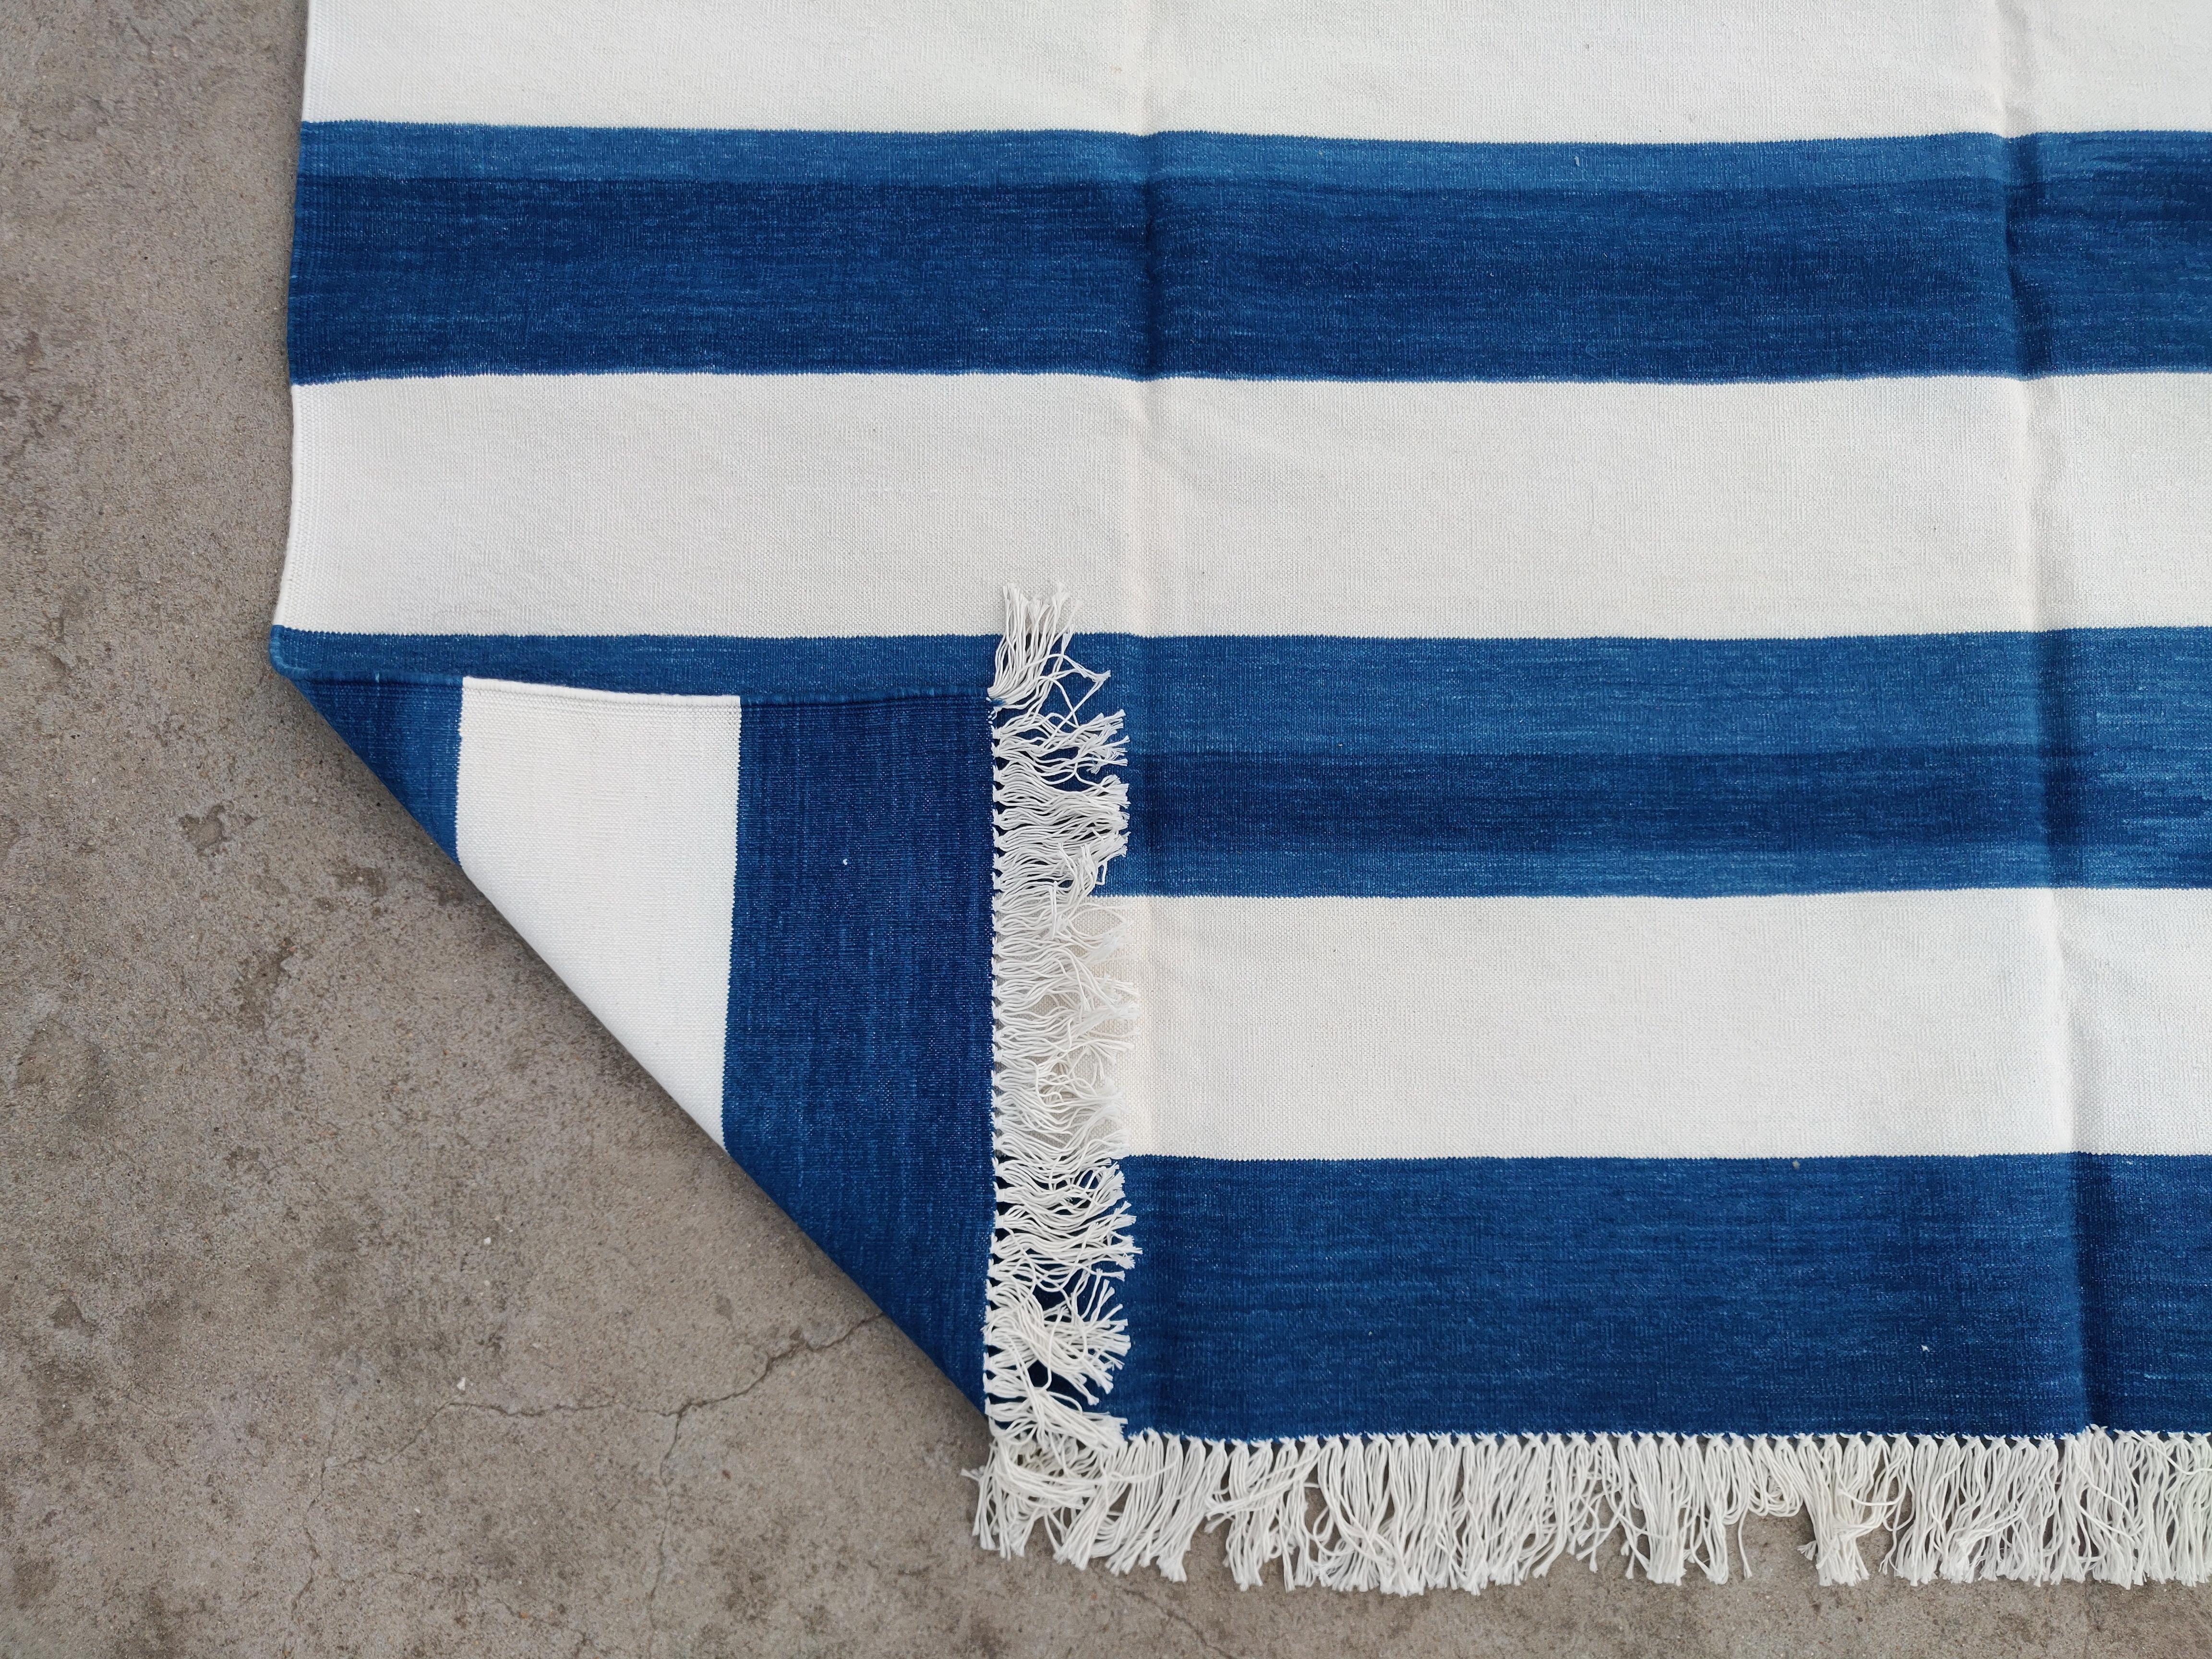 Handmade Cotton Area Flat Weave Rug, 6x9 Blue And White Striped Indian Dhurrie For Sale 2